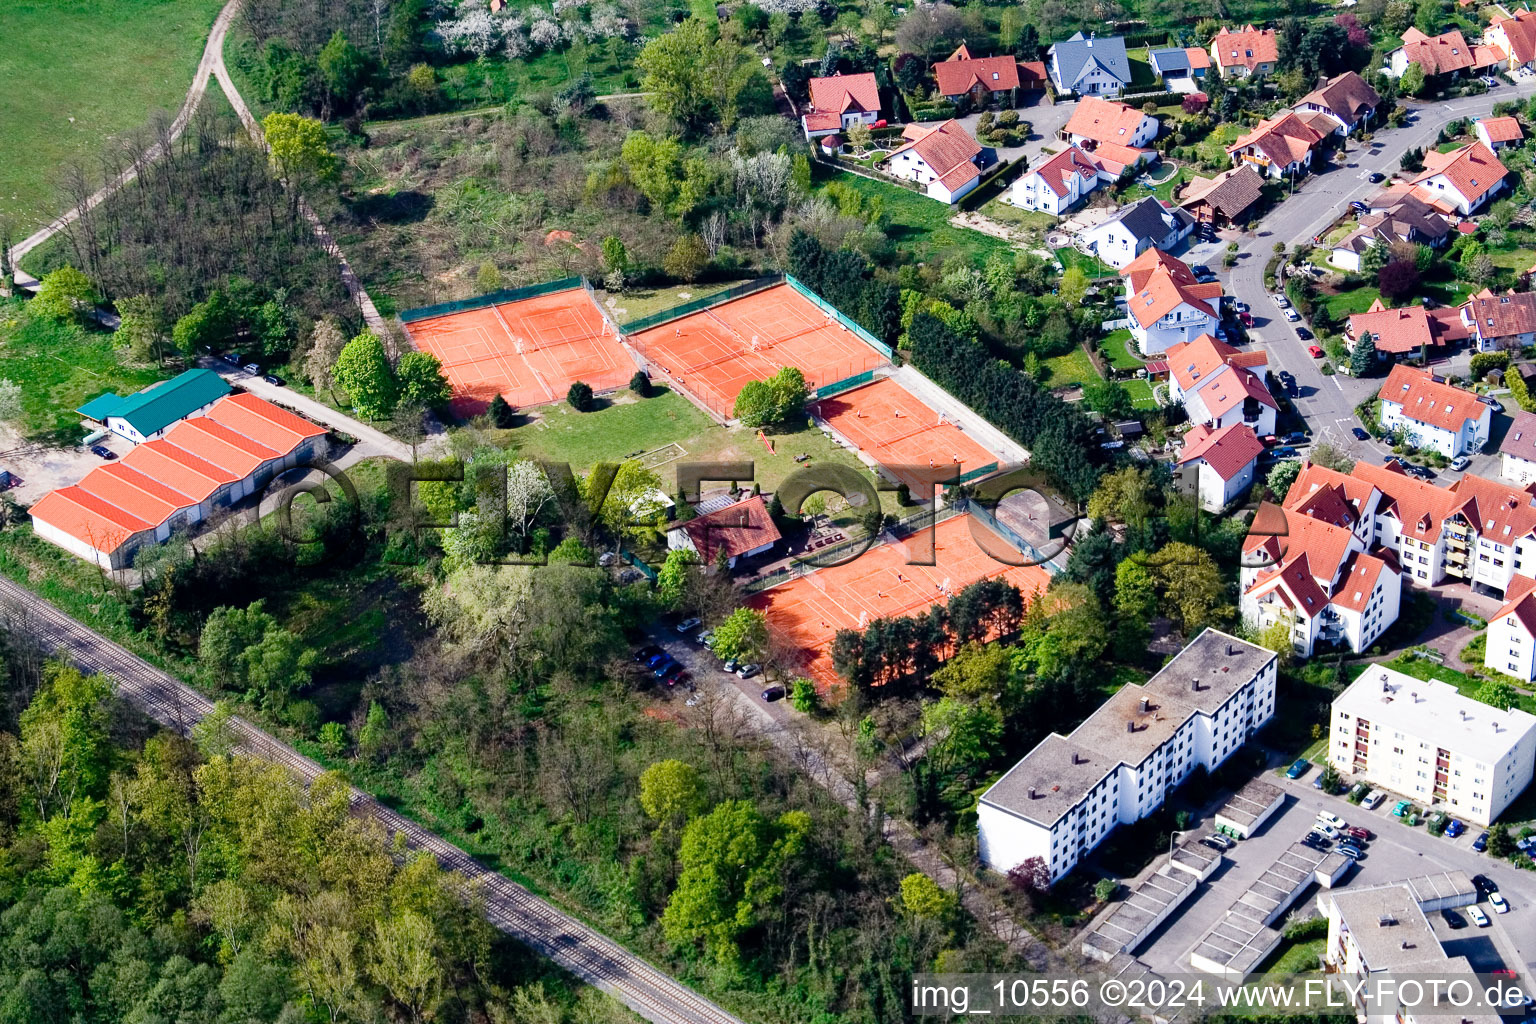 Tennis club in Jockgrim in the state Rhineland-Palatinate, Germany viewn from the air